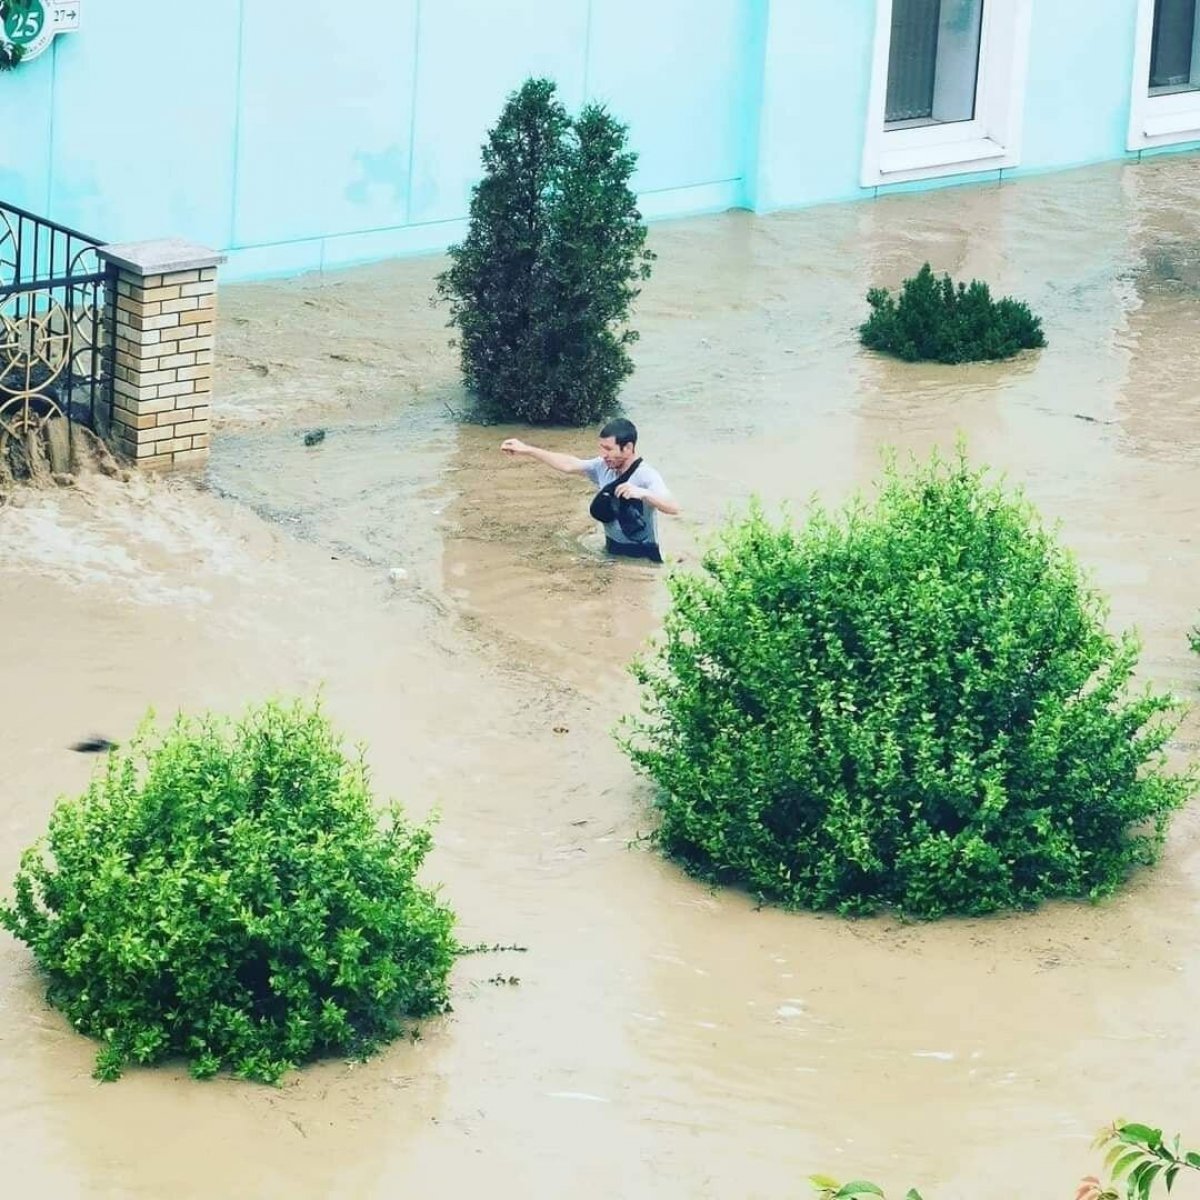 Streets flooded in Crimea, teams swam to the governor's boat #8